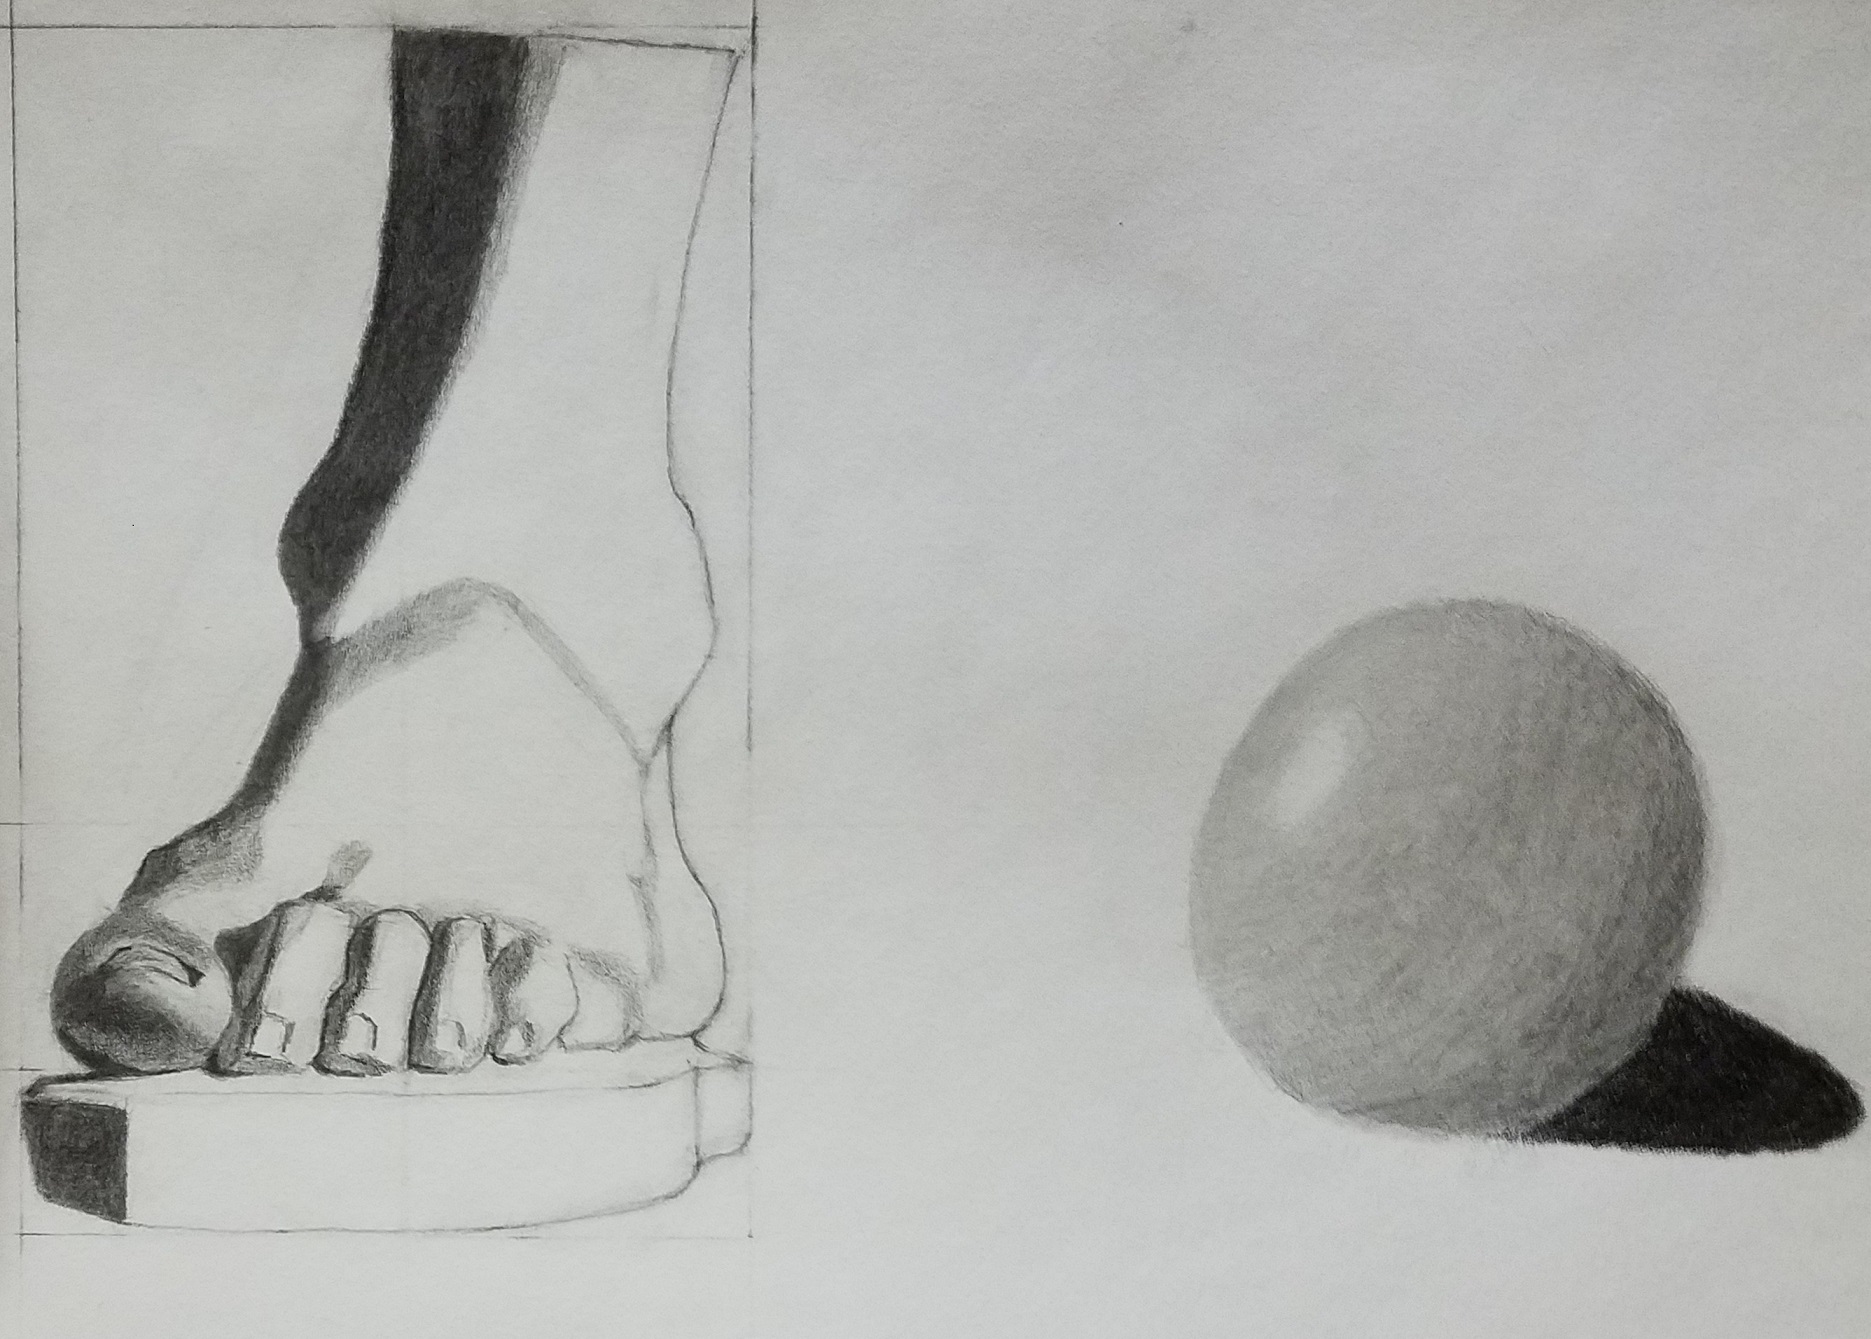 drawing of foot and sphere